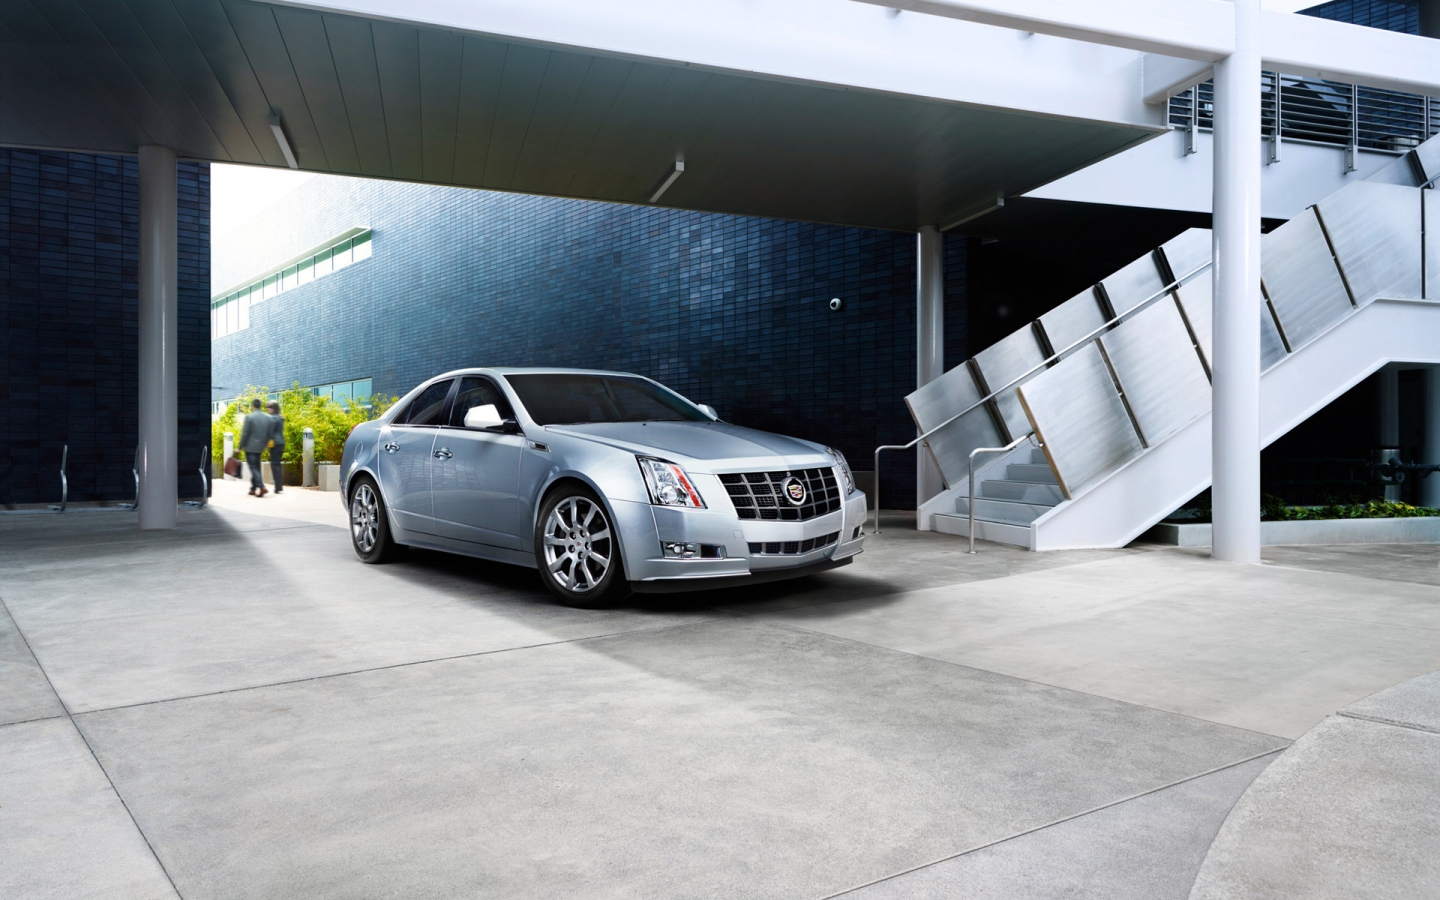 2012 Cadillac CTS Touring Edition for 1440 x 900 widescreen resolution